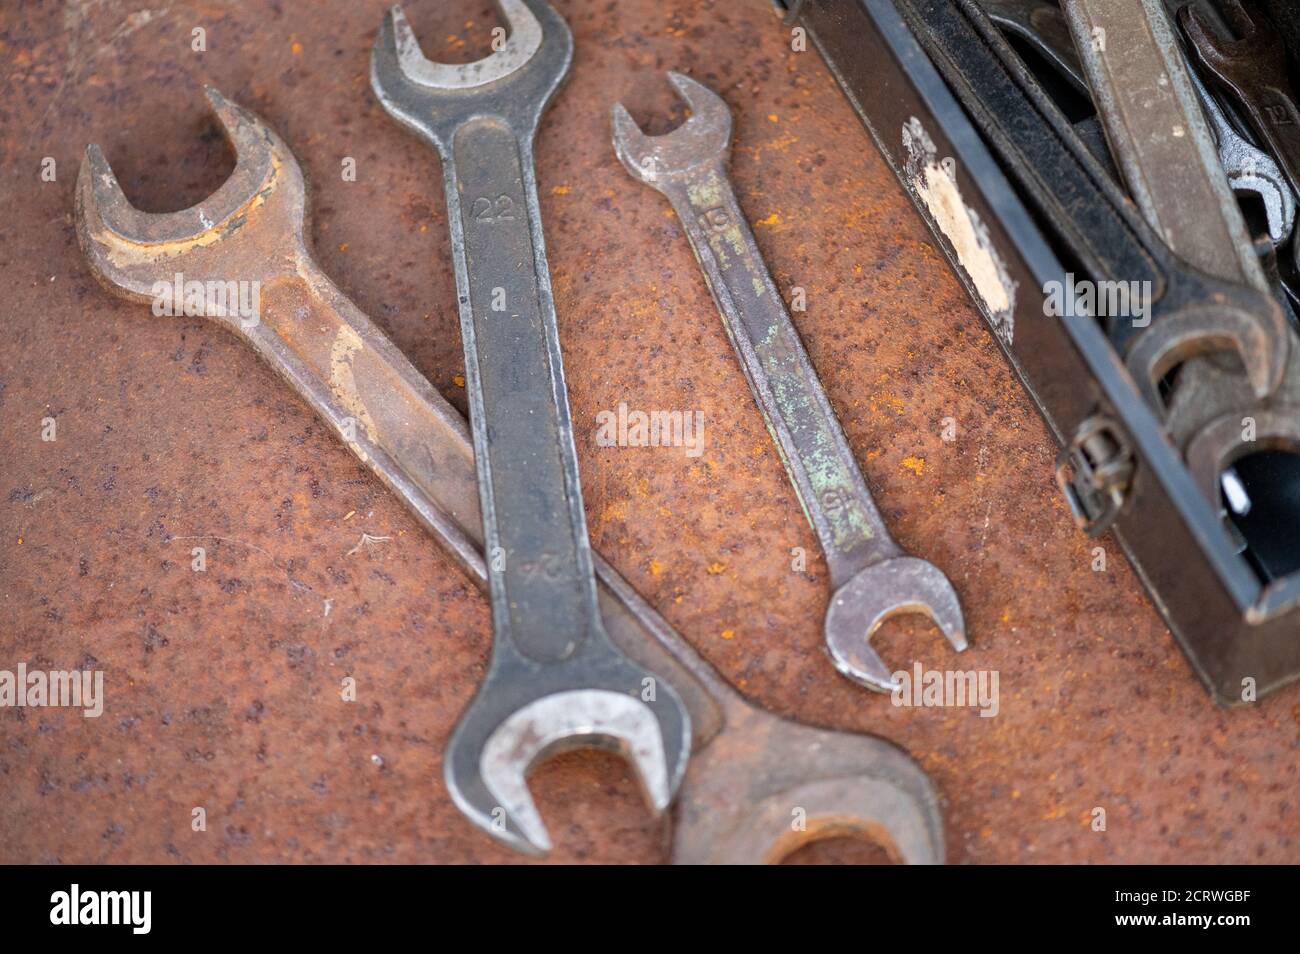 Old wrenches on a rusty sheet of metal, close-up, selective focus Stock Photo